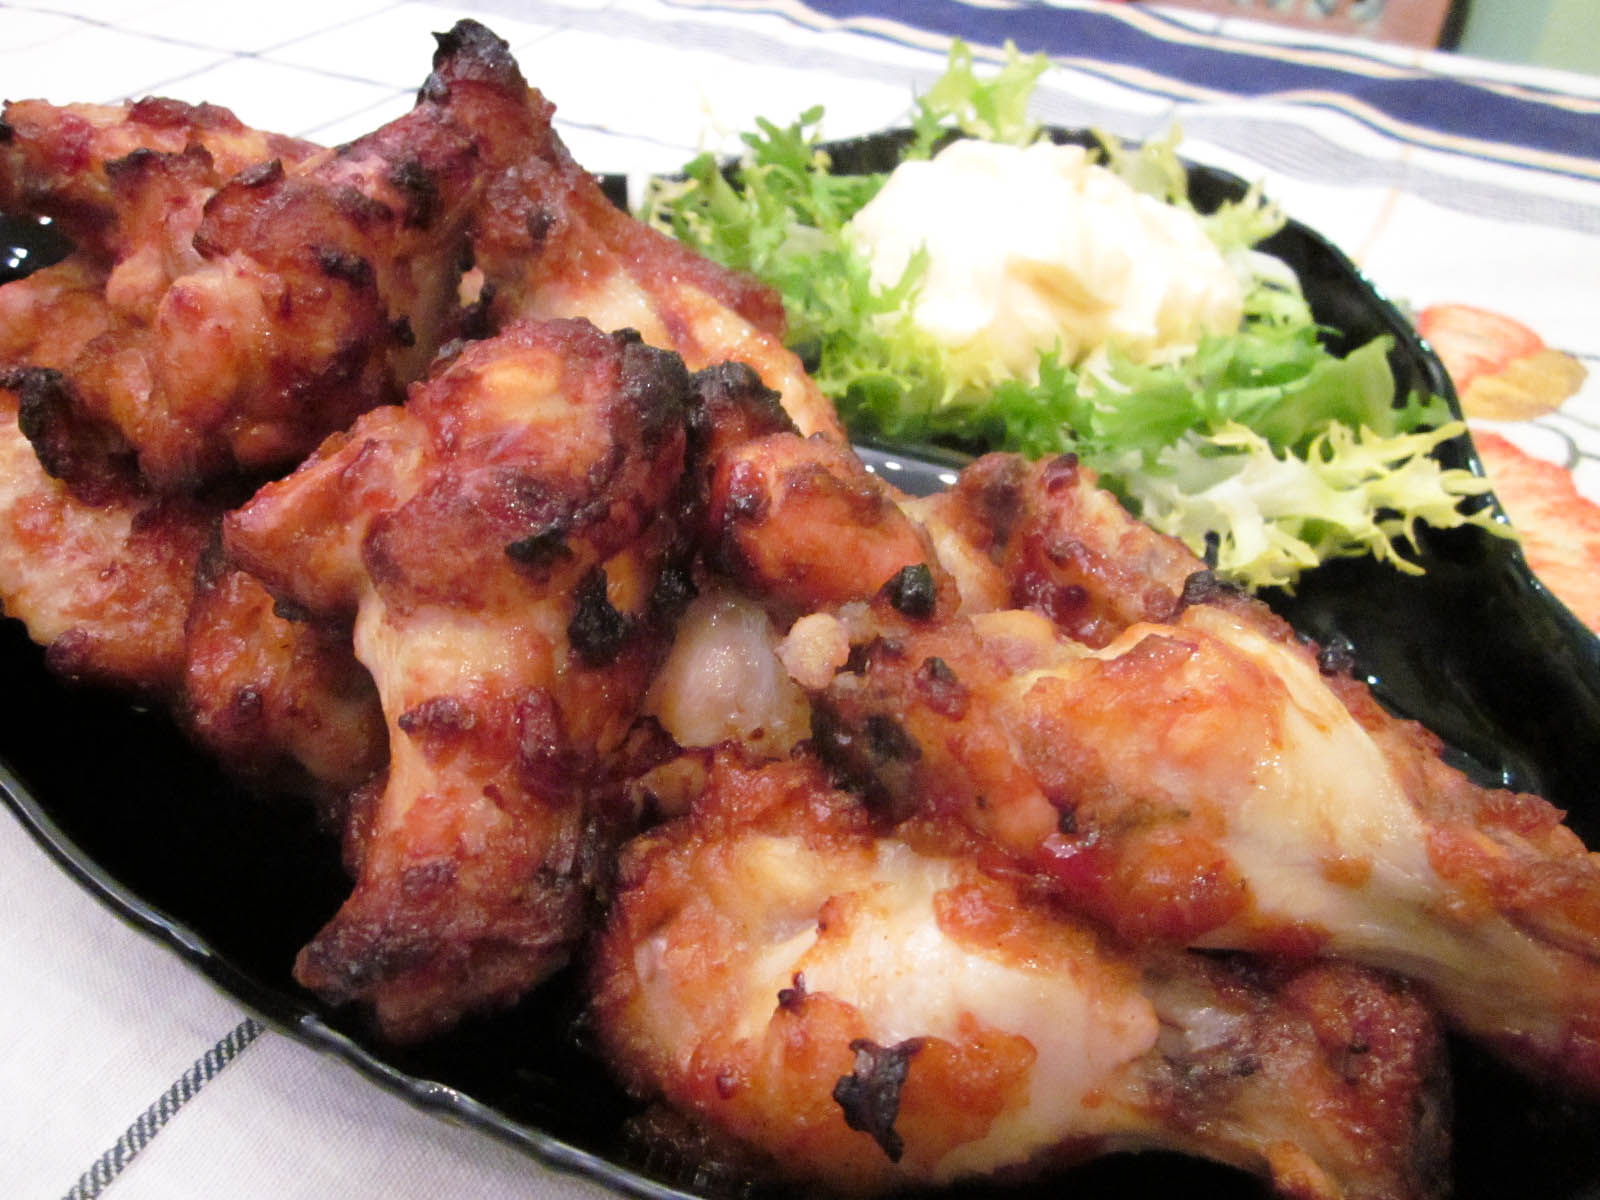 278883724036771289003862232709 Red hot Thai sauce chicken wings - 19979372023375638622329052600929702 - DolceSalato  ©')ß\ R !©')ß\ ©')™ !©')ß\ 